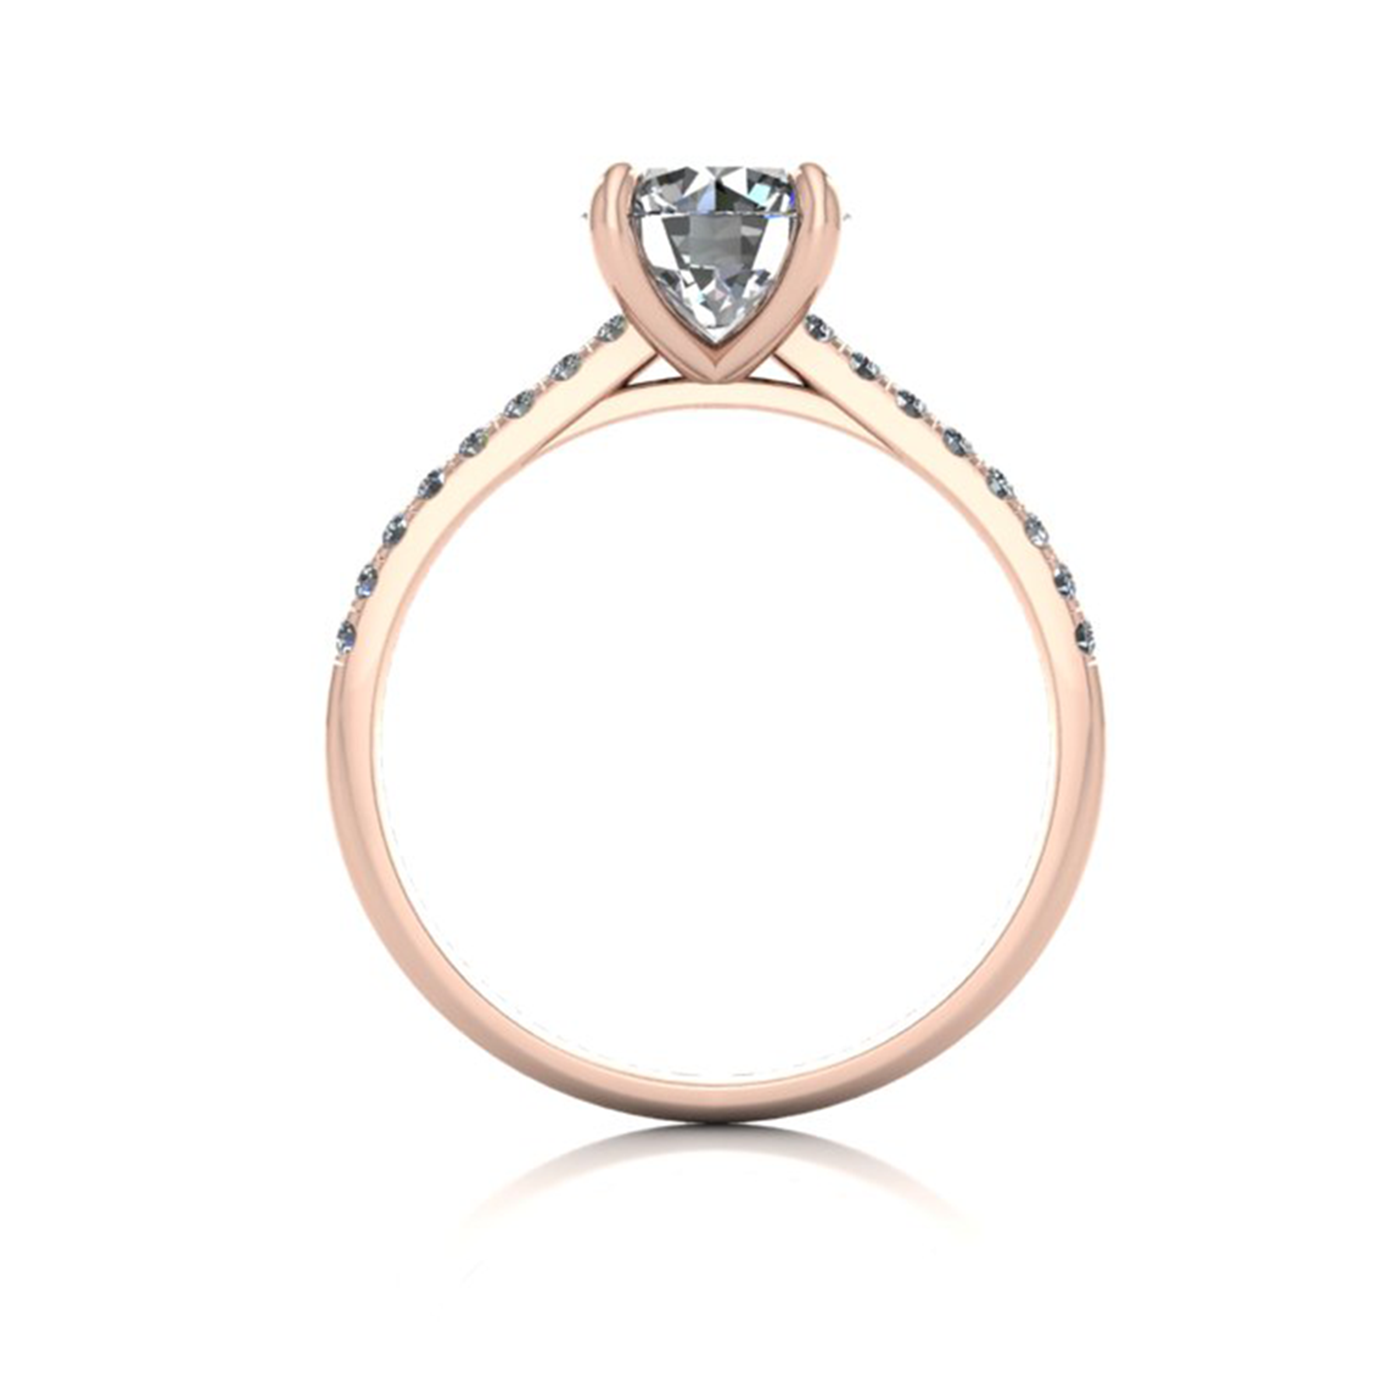 18K ROSE GOLD 4 PRONGS ROUND CUT DIAMOND ENGAGEMENT RING WITH WHISPER THIN PAVÉ SET BAND